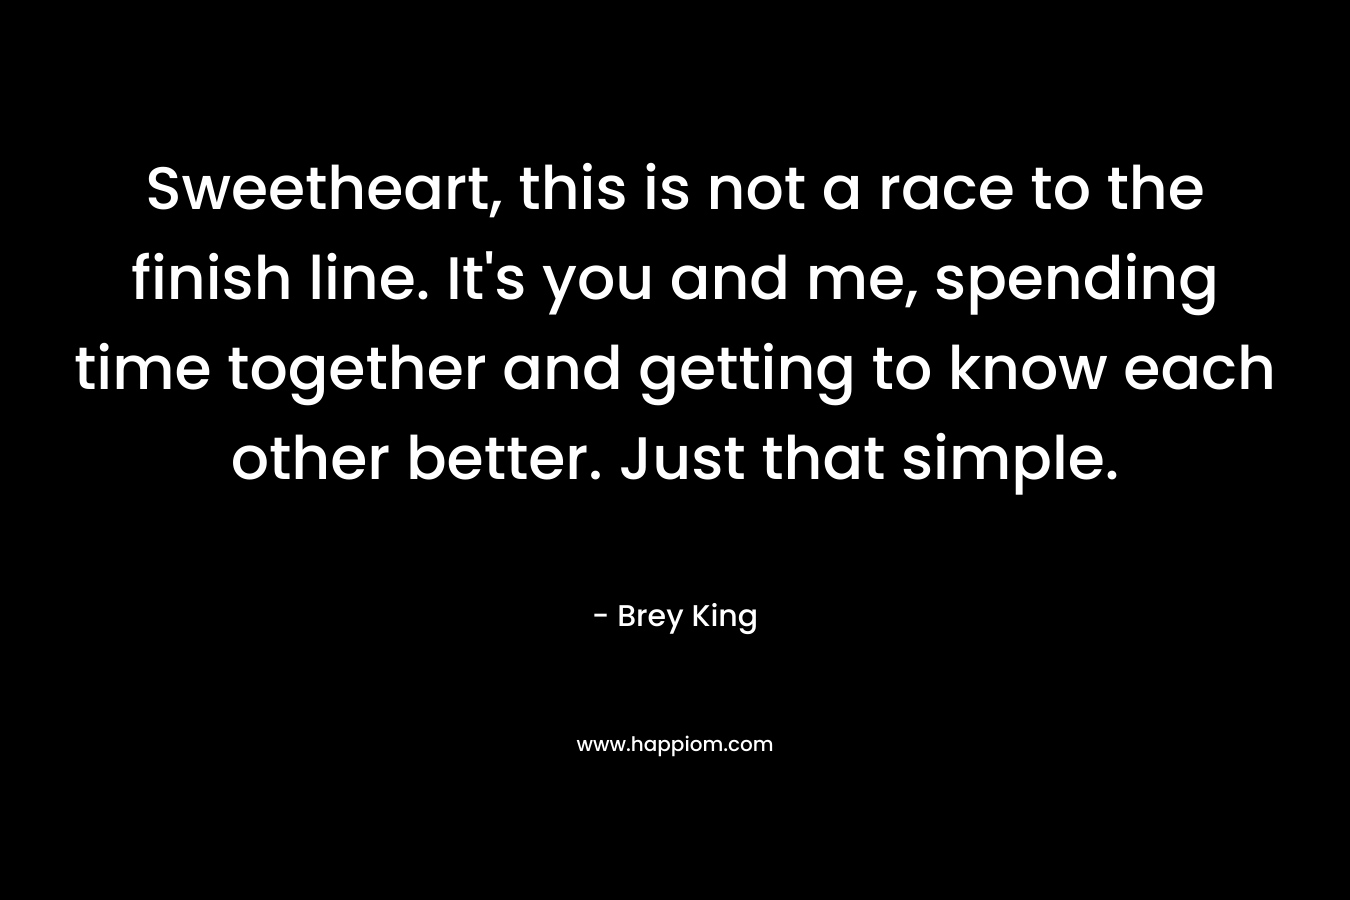 Sweetheart, this is not a race to the finish line. It’s you and me, spending time together and getting to know each other better. Just that simple. – Brey King